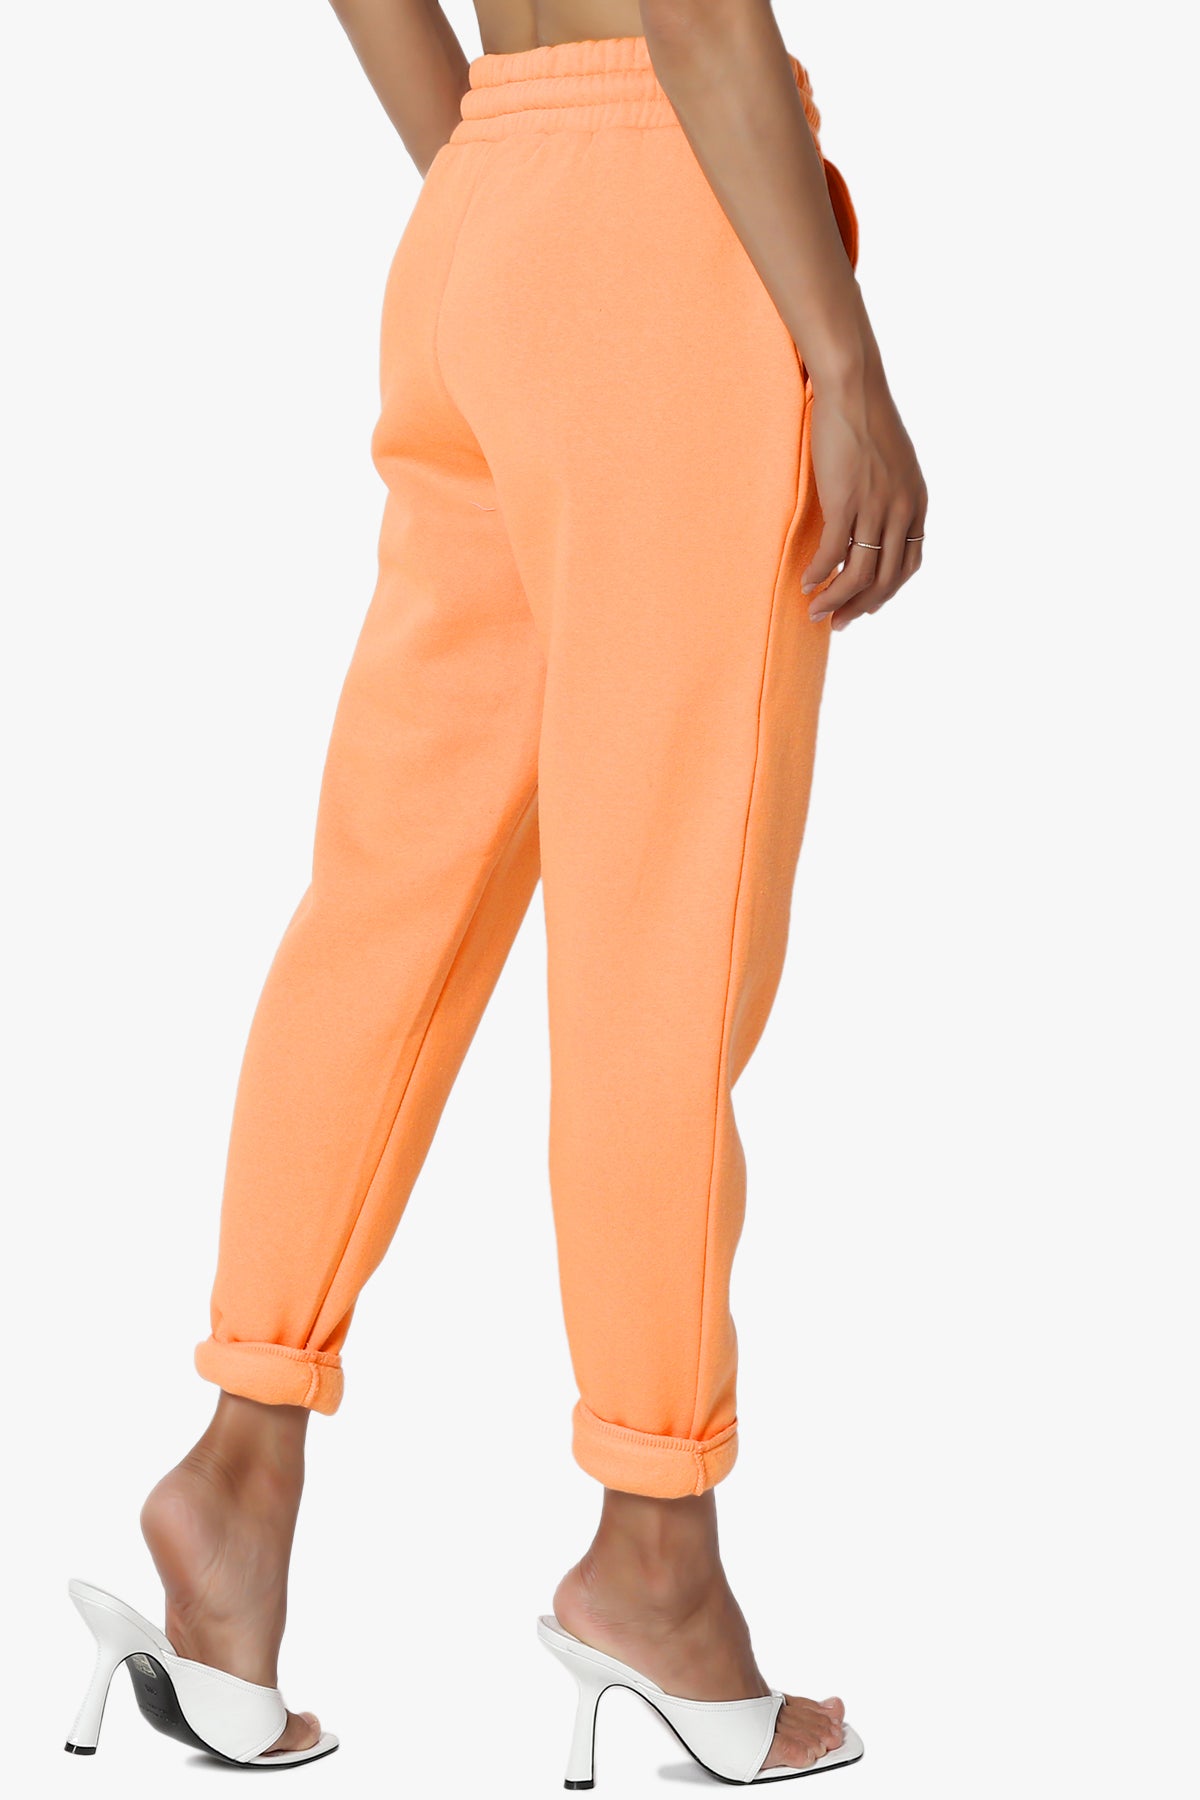 Buy LADY WILLINGTON Women's Relaxed Fit Cotton Trackpants  (MUSKI-15_Multicolor_S) at